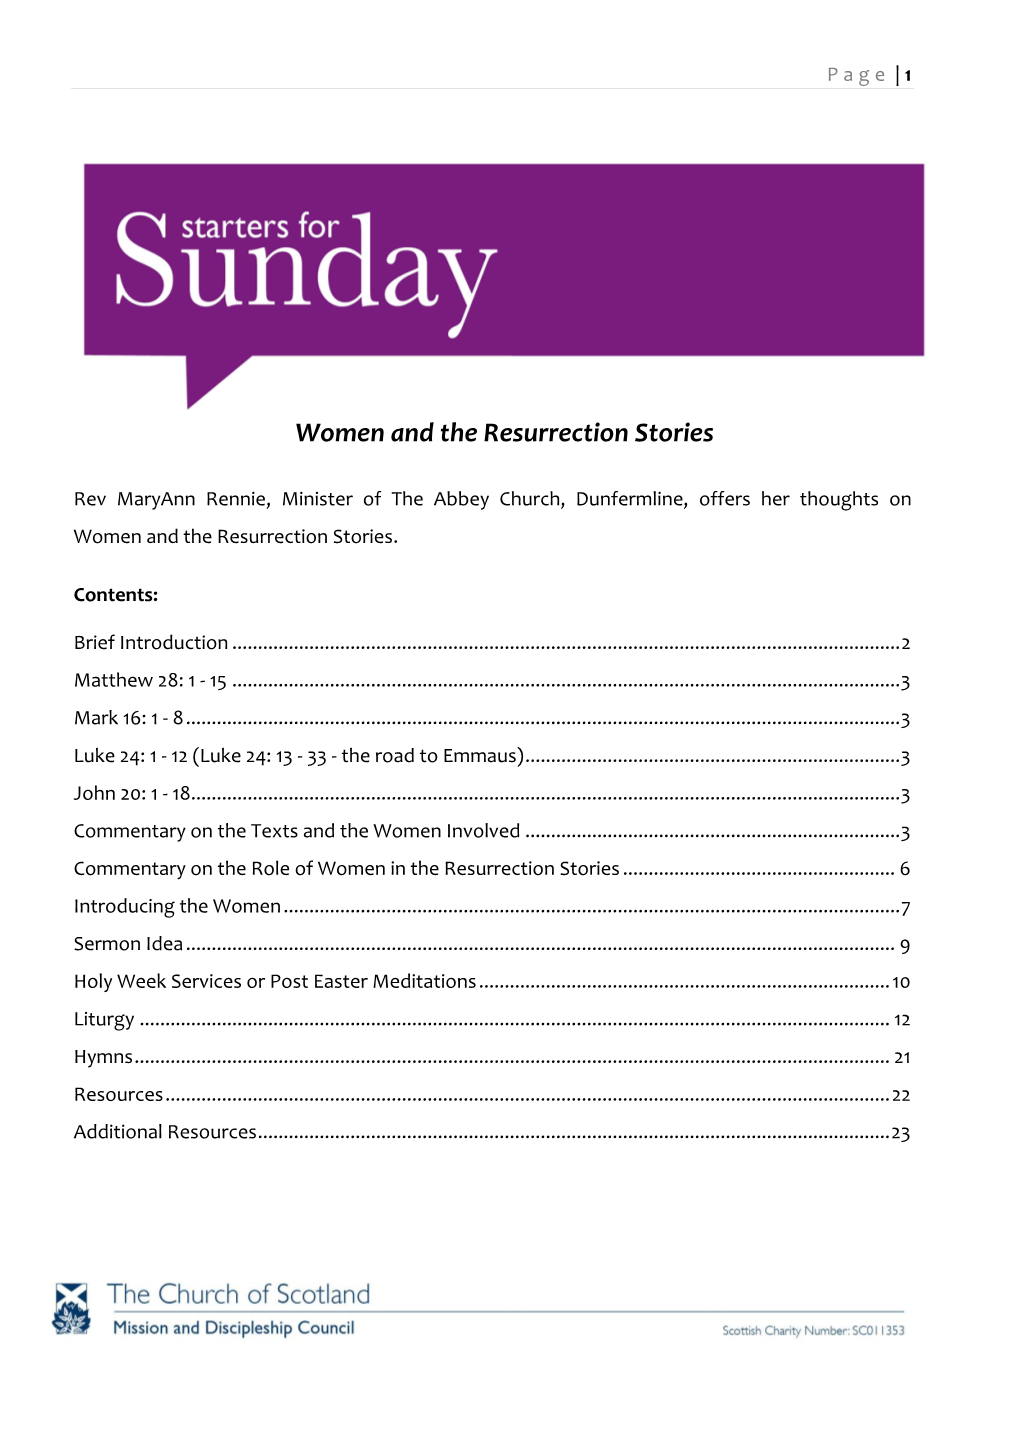 Women and the Resurrection Stories